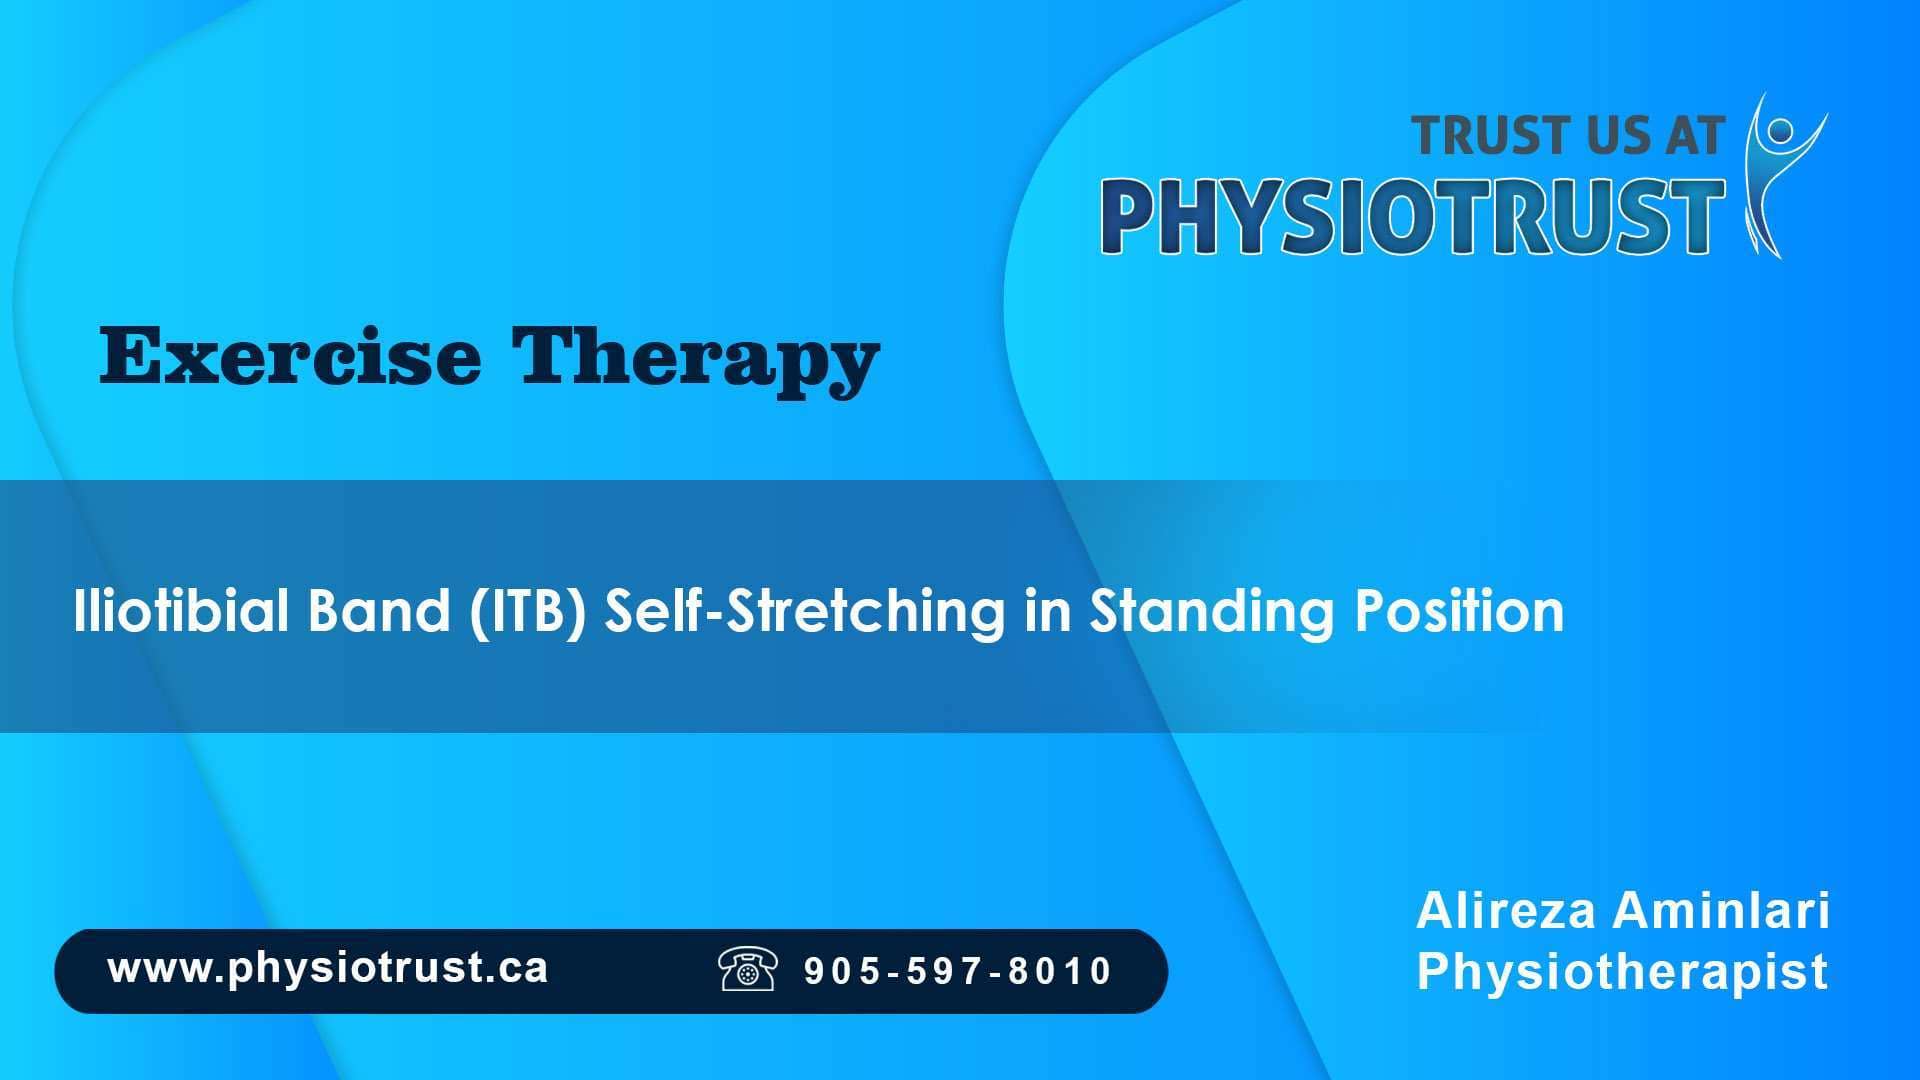 Iliotibial Band (ITB) Self-Stretching in Standing Position